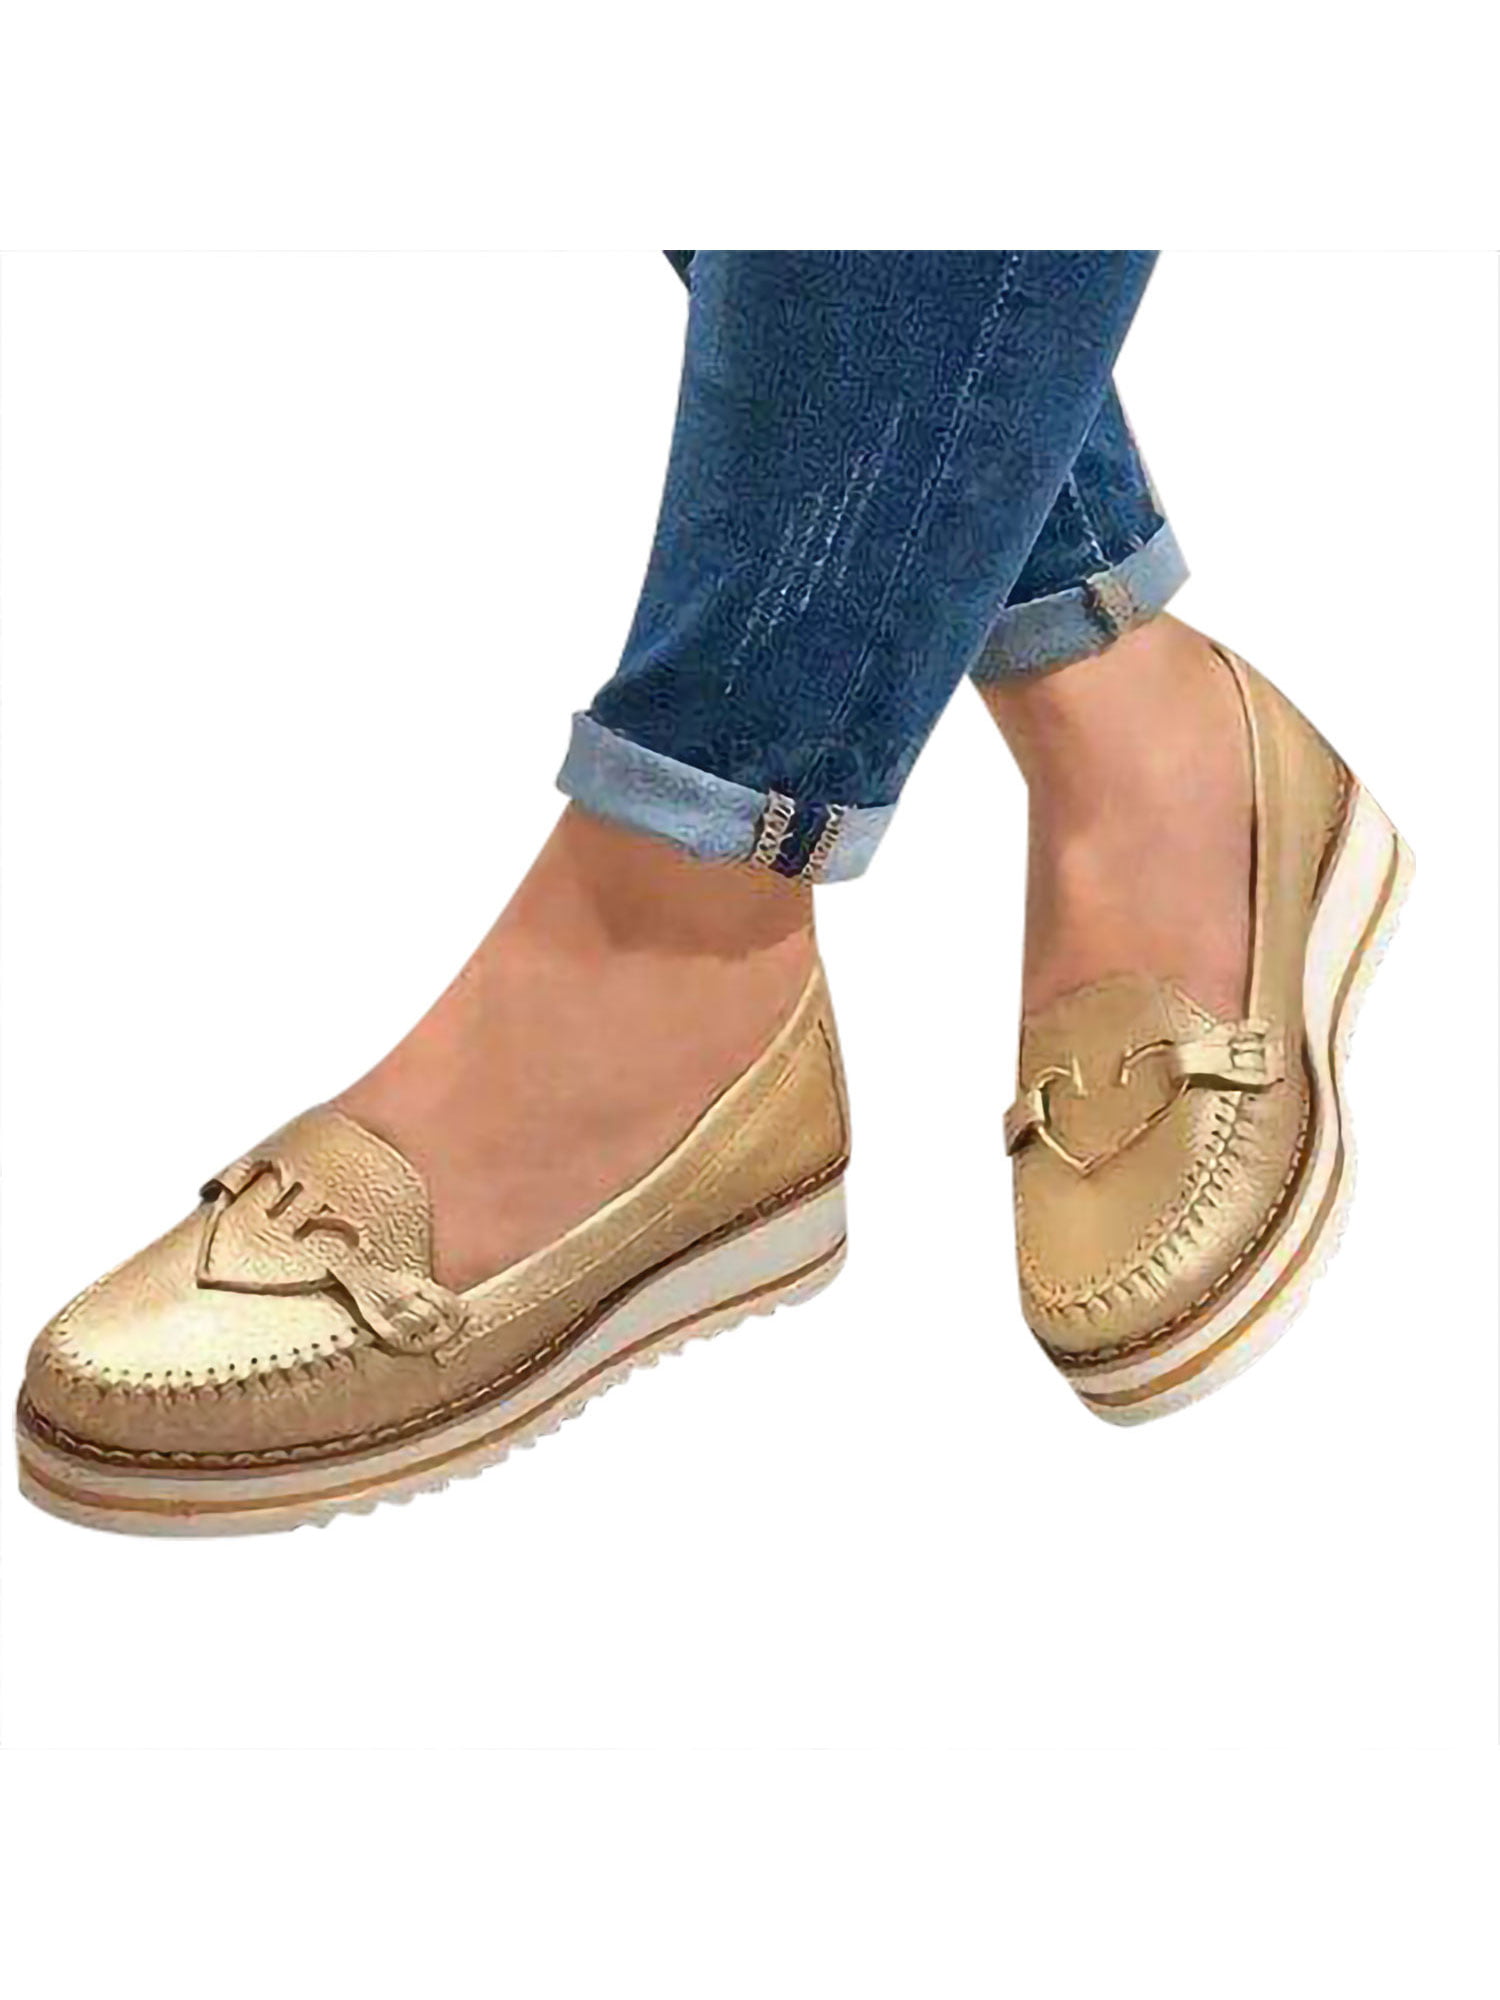 Flats Shoes Women Slip-on Loafers PU Comfort Walking Classic Square Toe Shoes